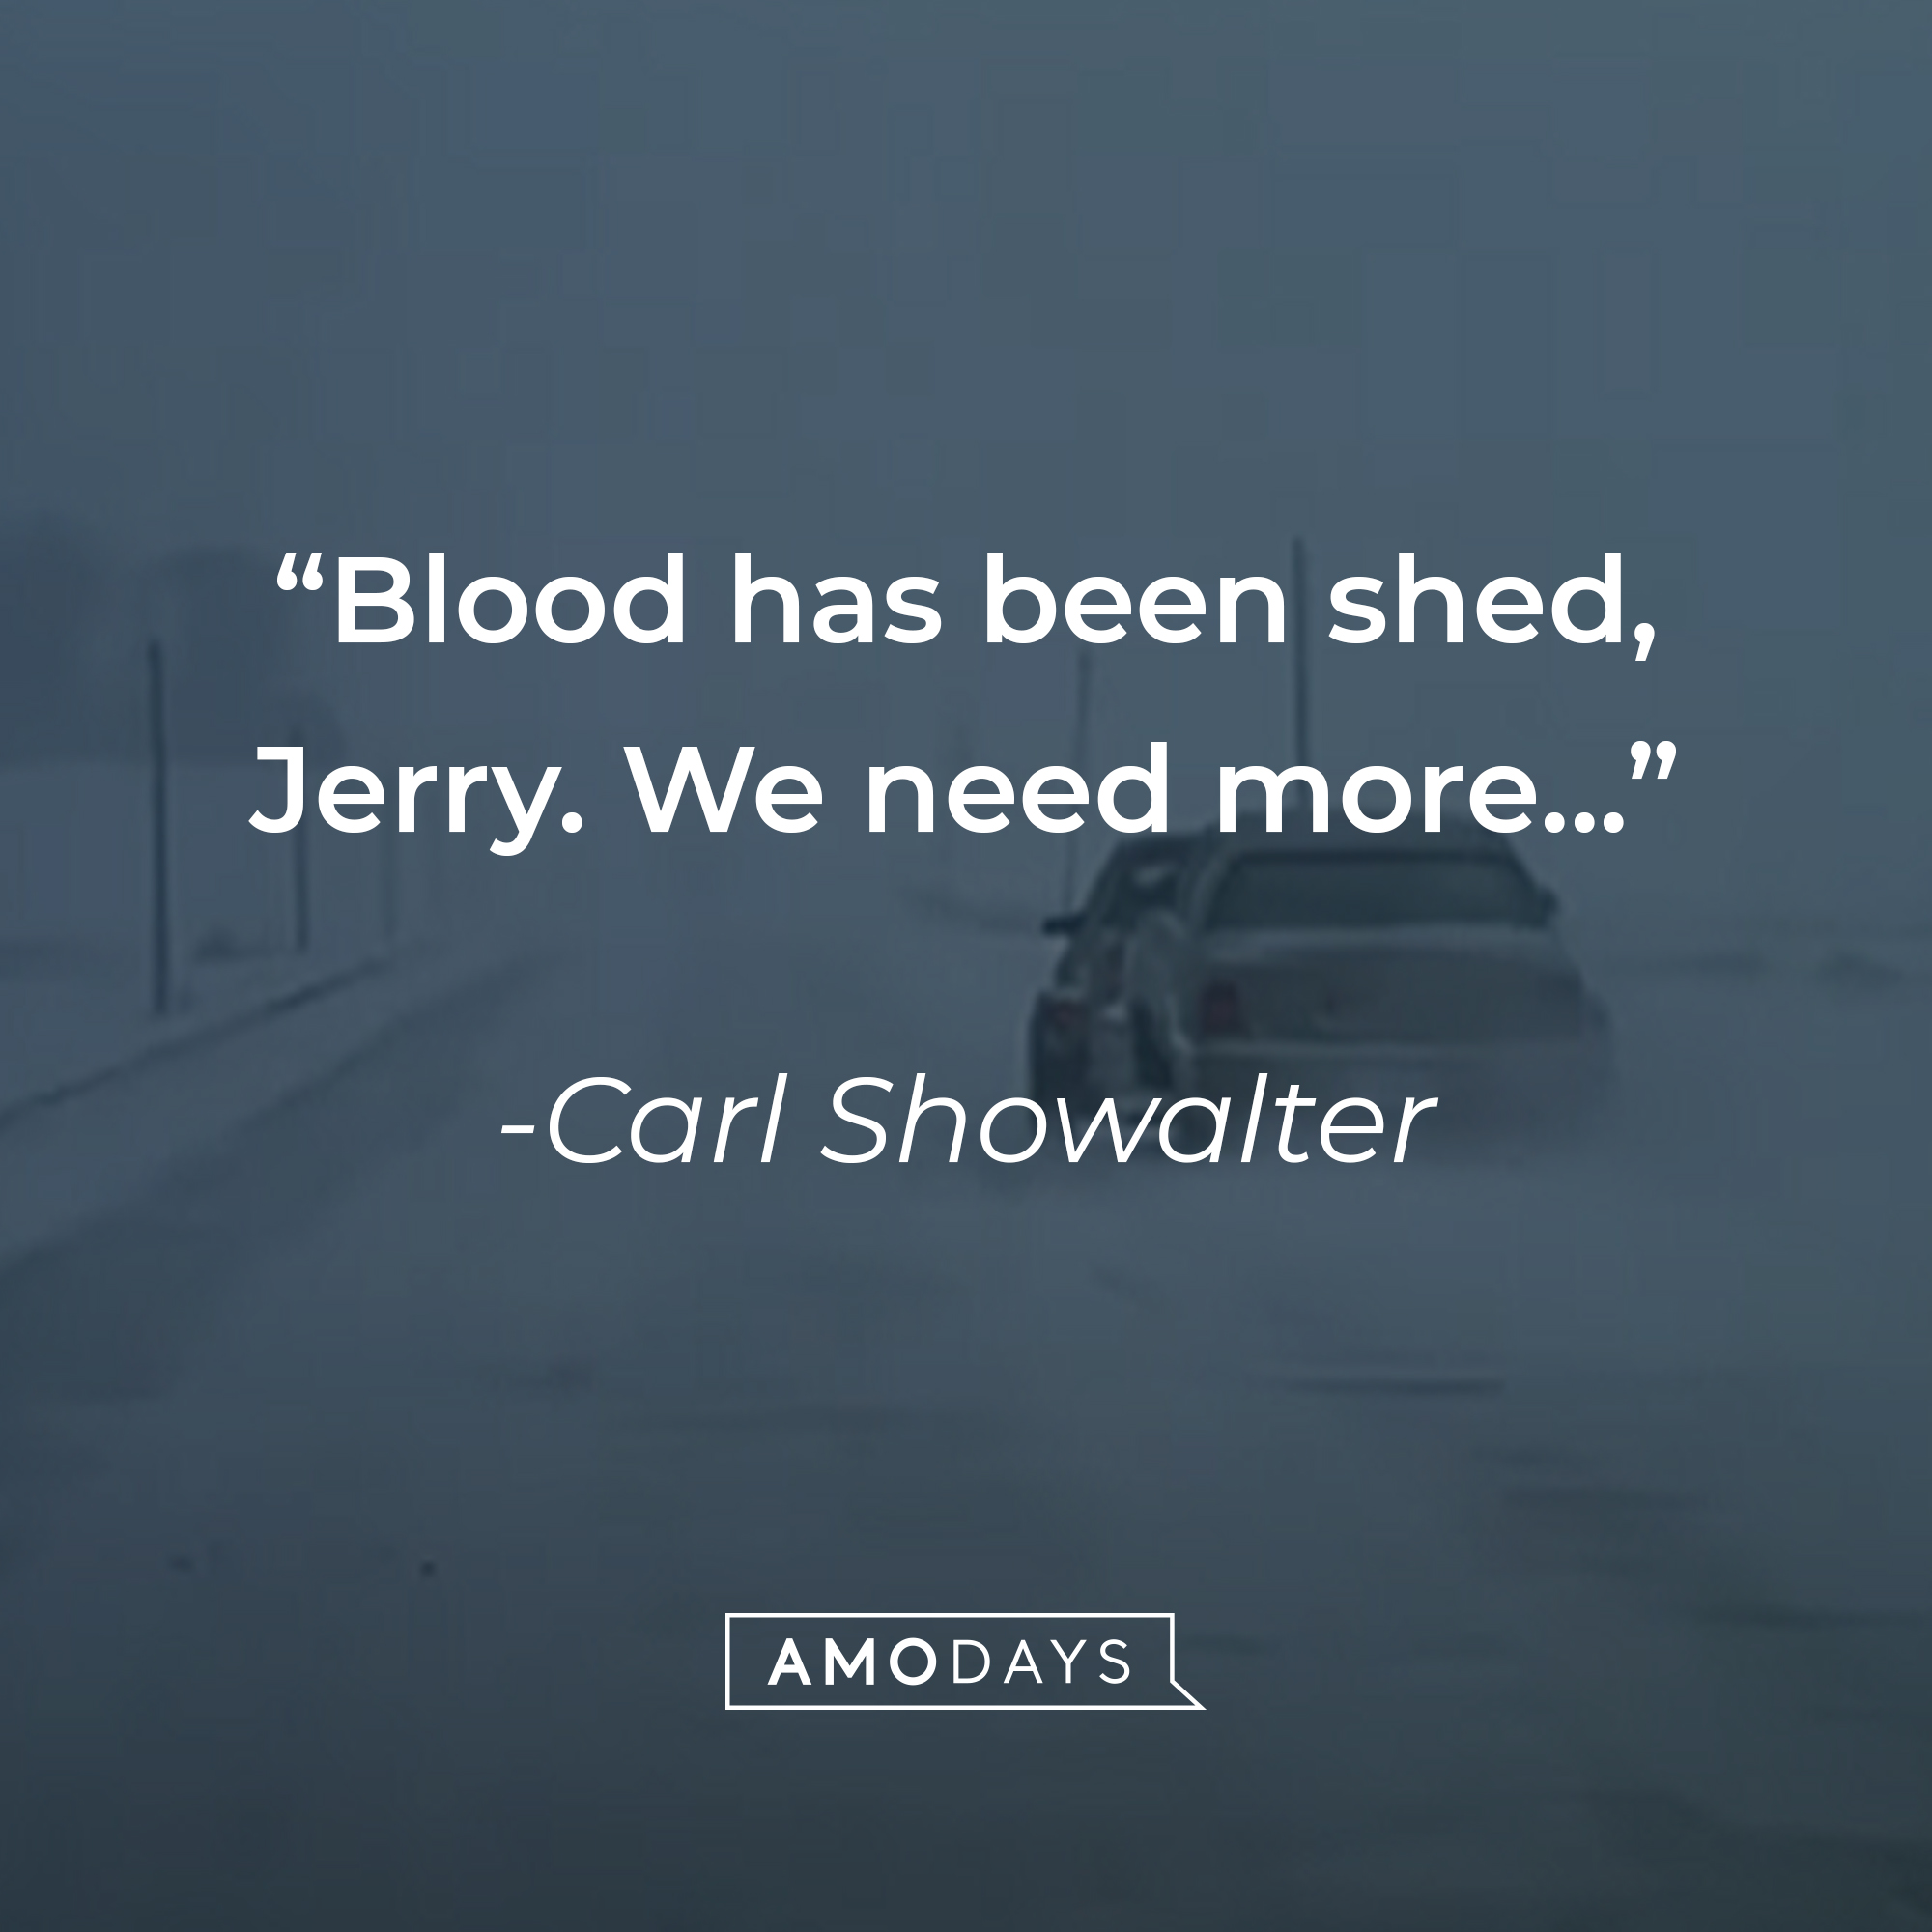 Carl Showalter's quote: "Blood has been shed, Jerry. We need more..." | Source: youtube.com/MGMStudios